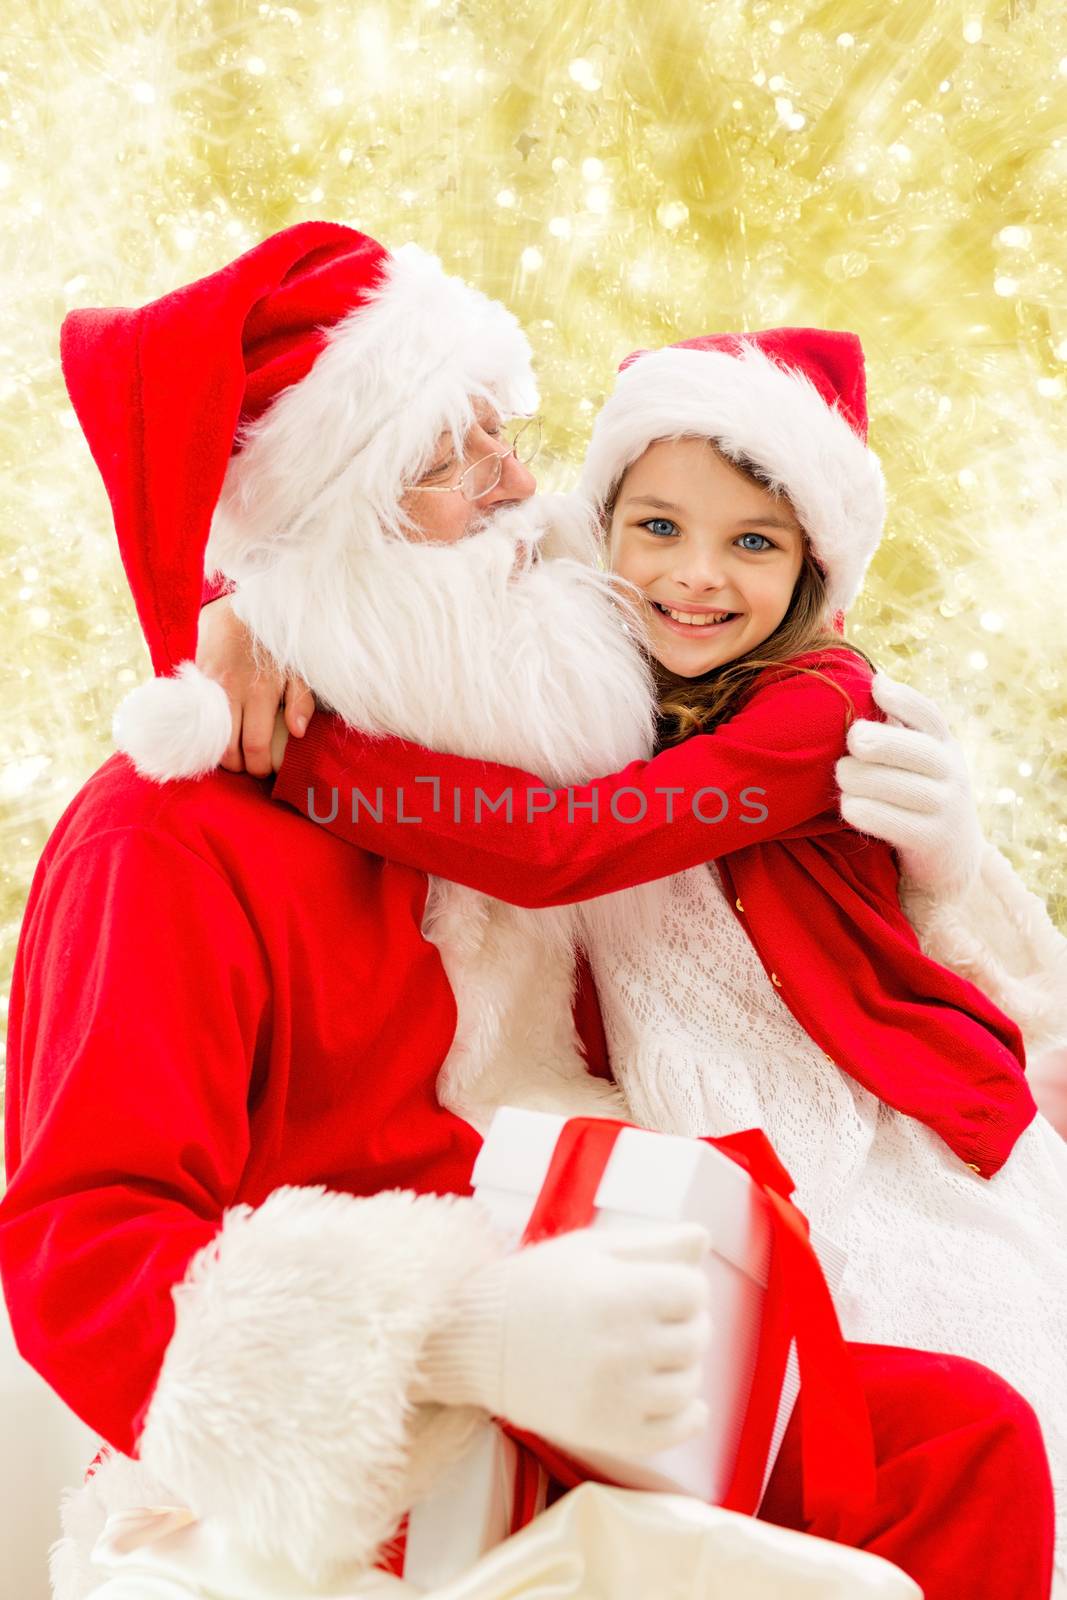 holidays, christmas, childhood and people concept - smiling little girl hugging with santa claus over yellow lights background